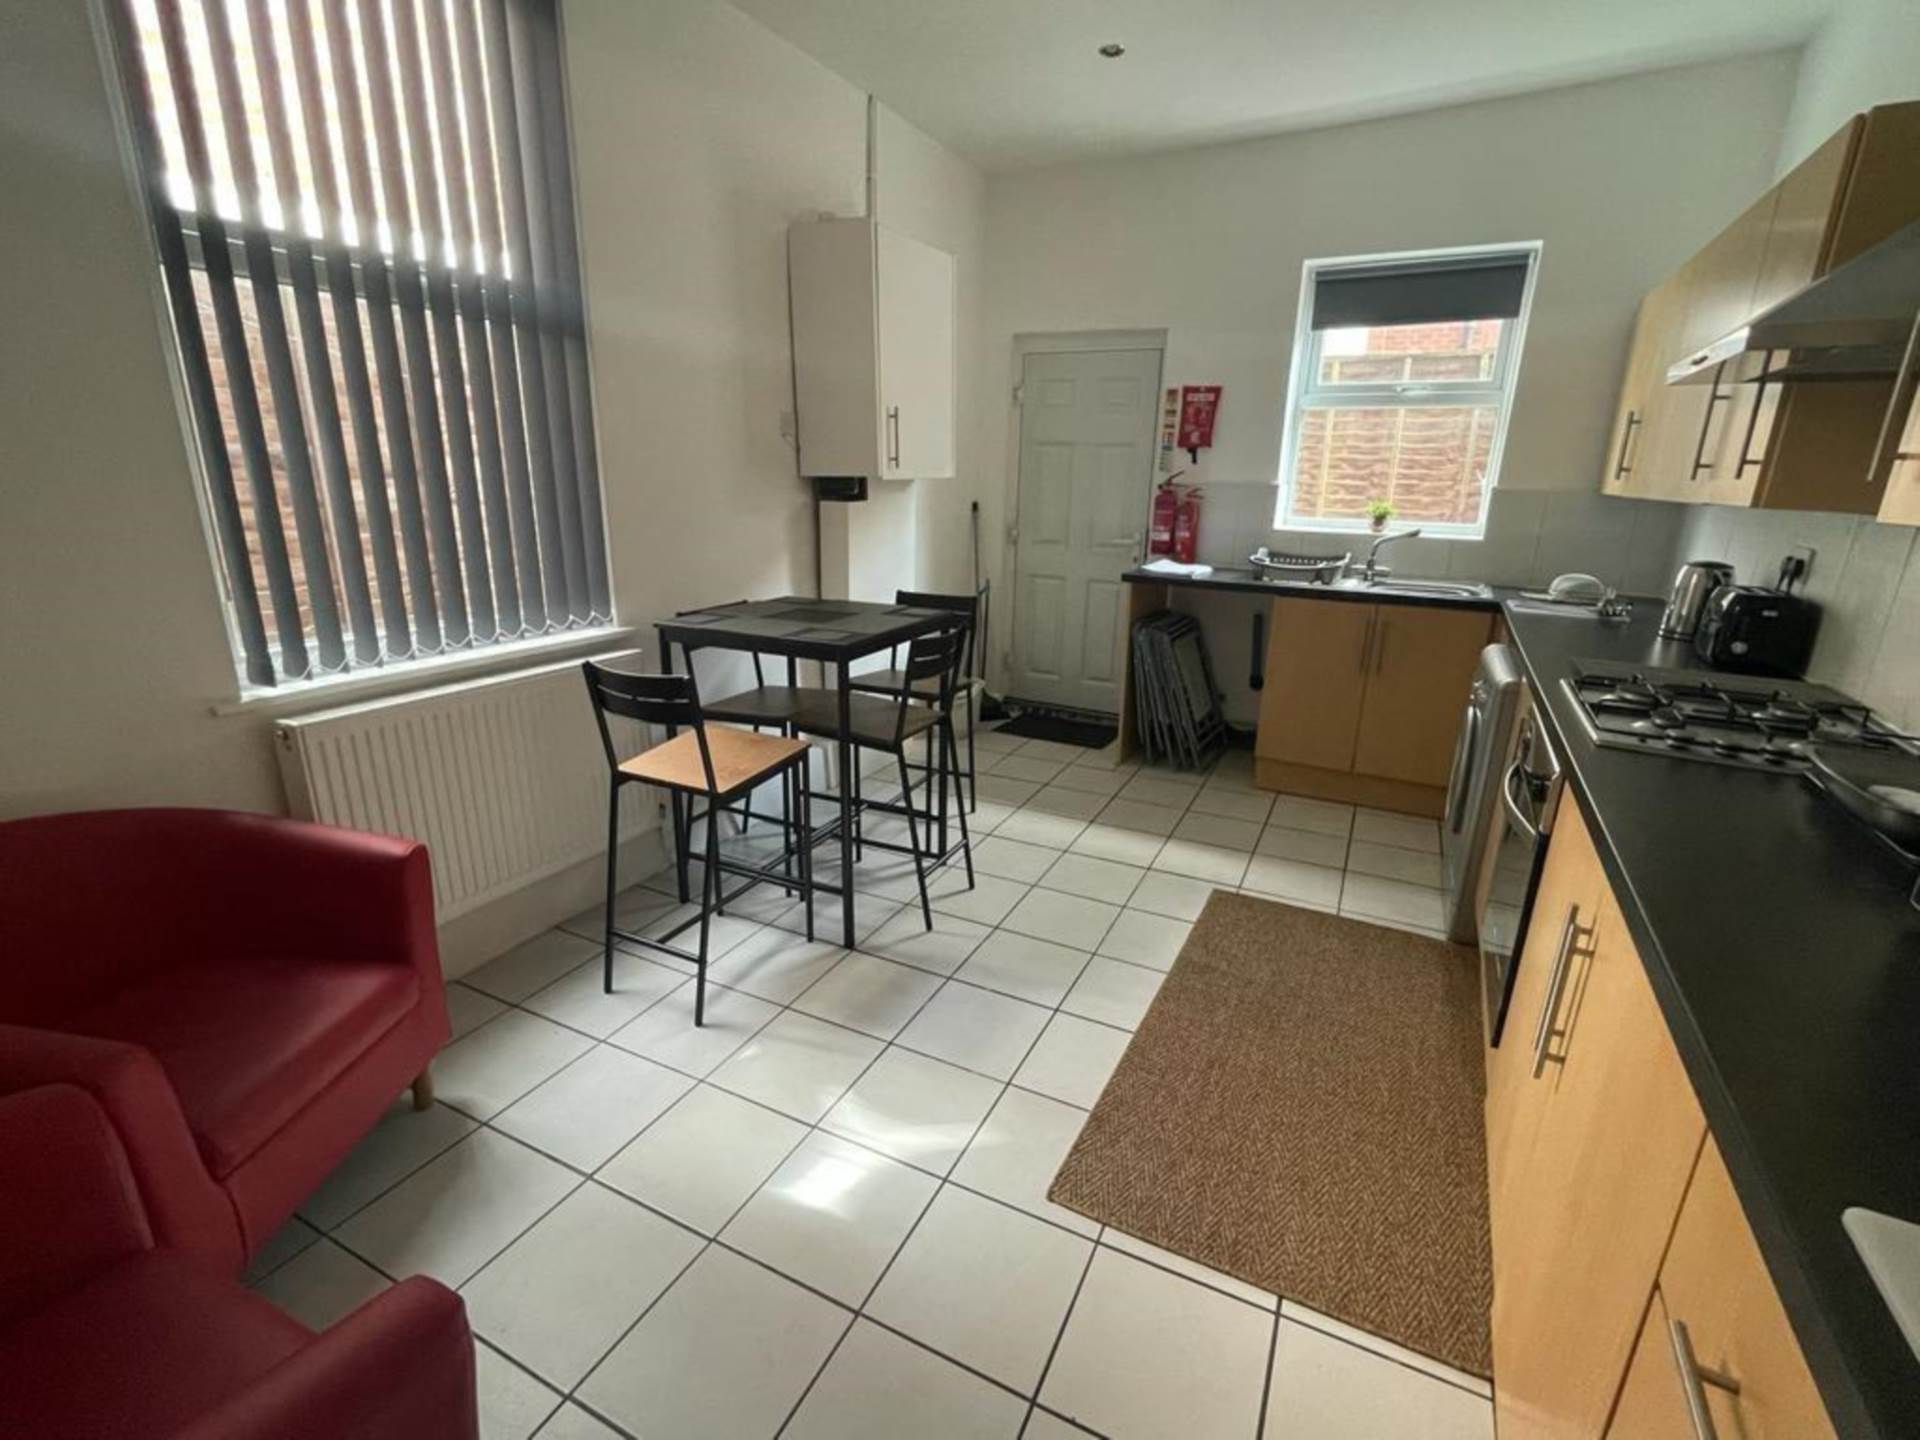 Thornycroft Road, Wavertree - 1 ROOM AVAILABLE - STUDENT ROOM, Image 4